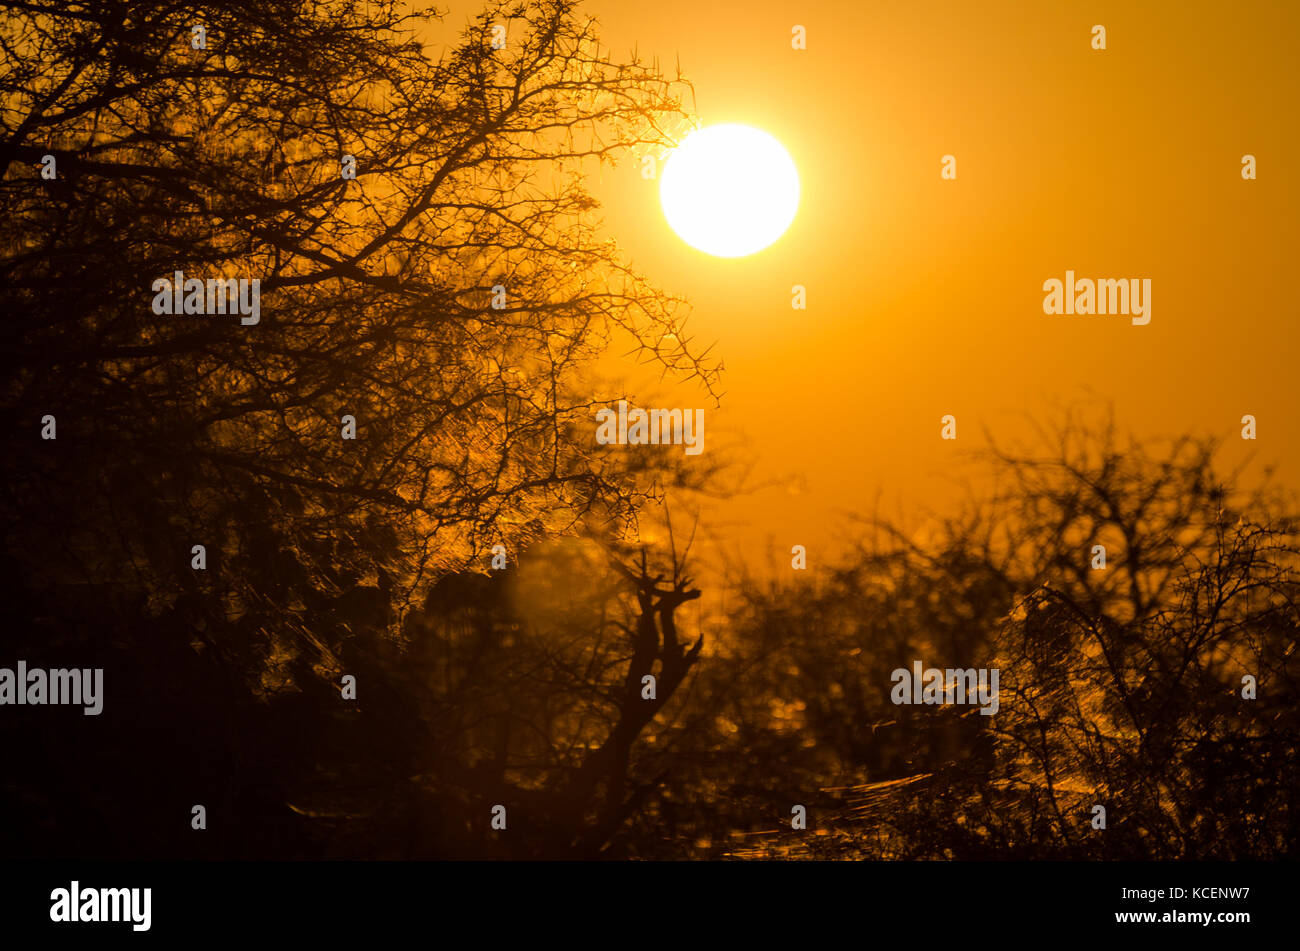 Beautiful red orange sunrise over silhouette of thorny trees with spider webs in Etosha National Park, Namibia, Africa Stock Photo